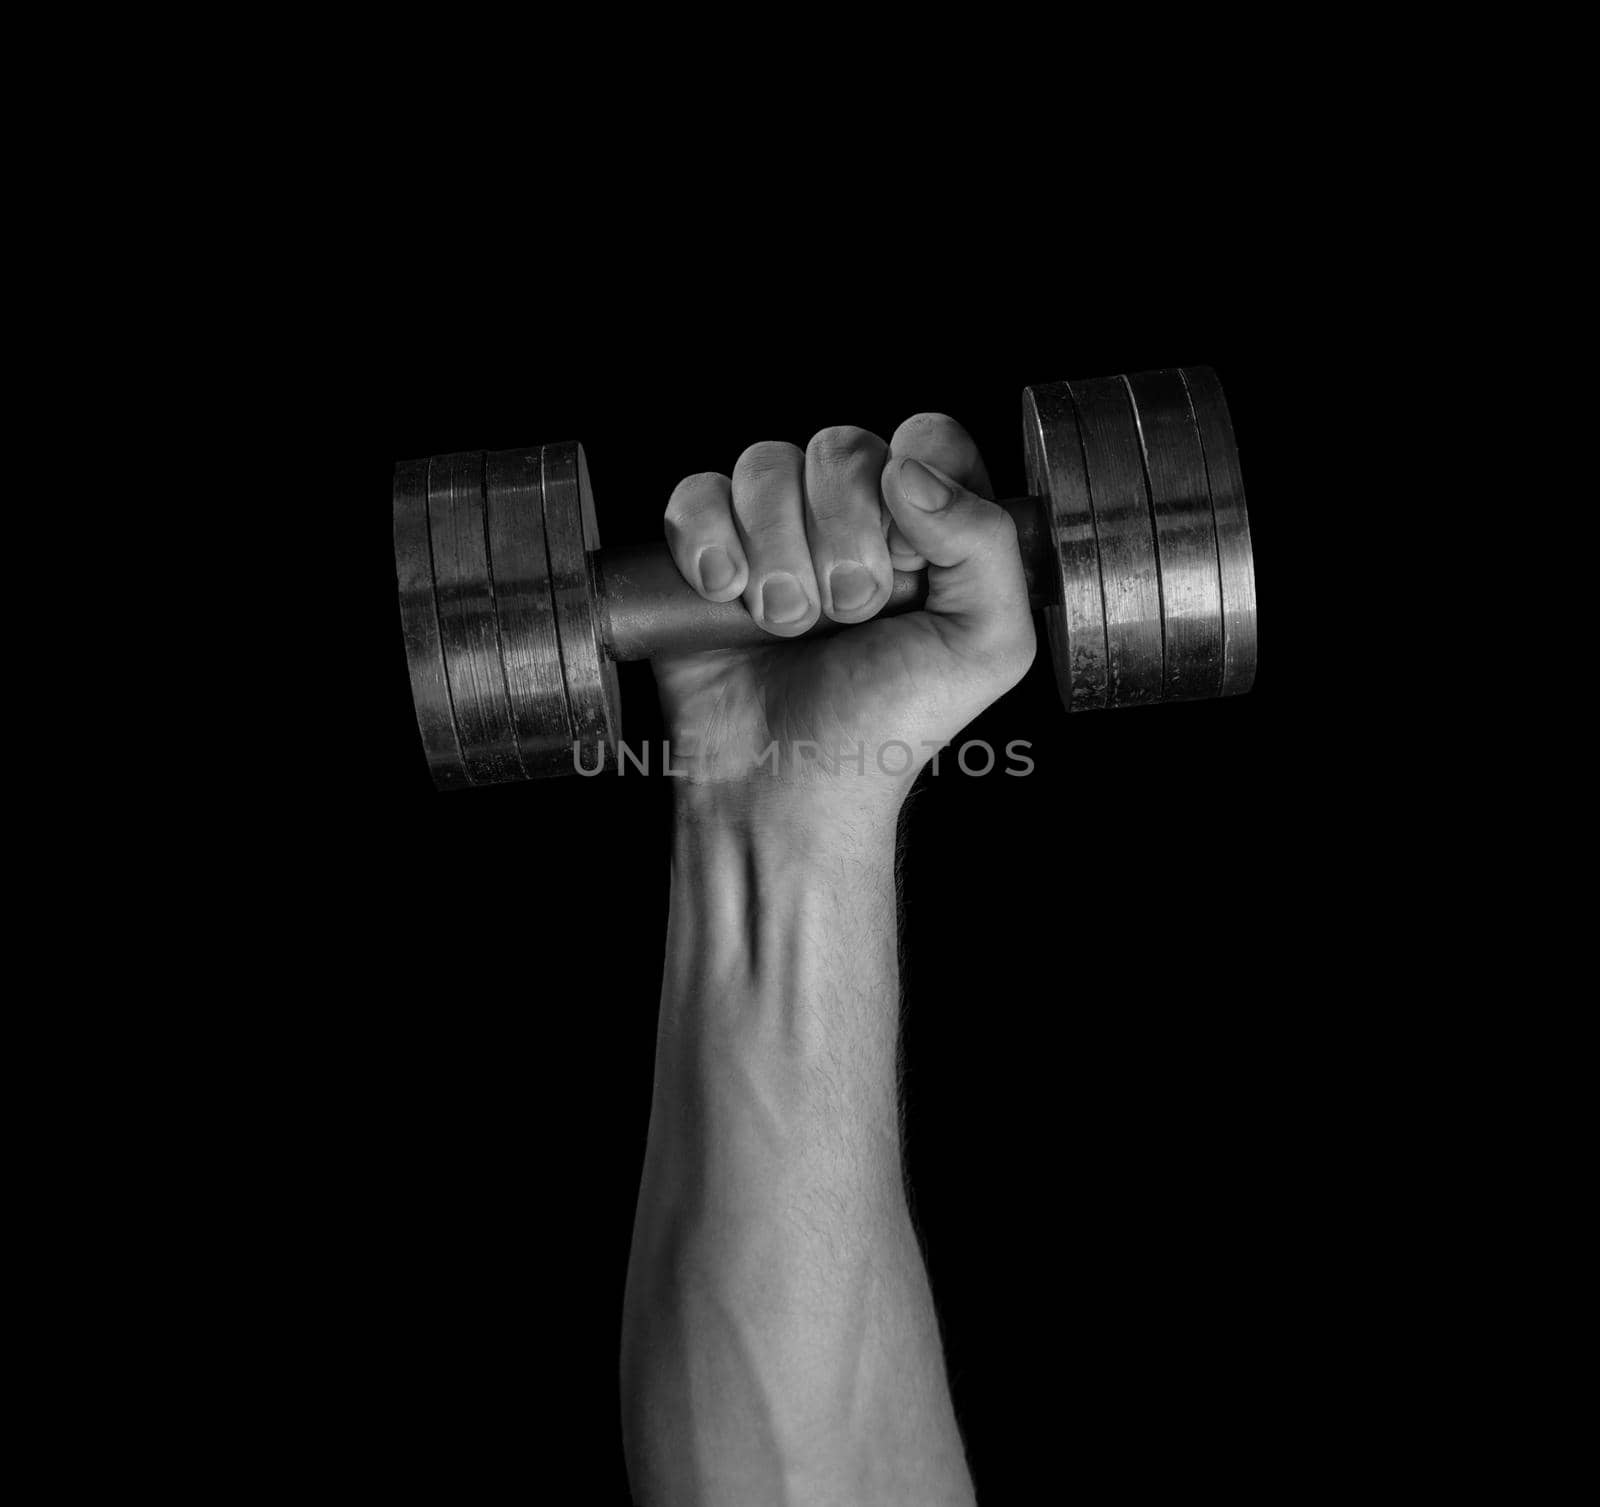 Hand with metal dumbbell, monochrome image by alexAleksei